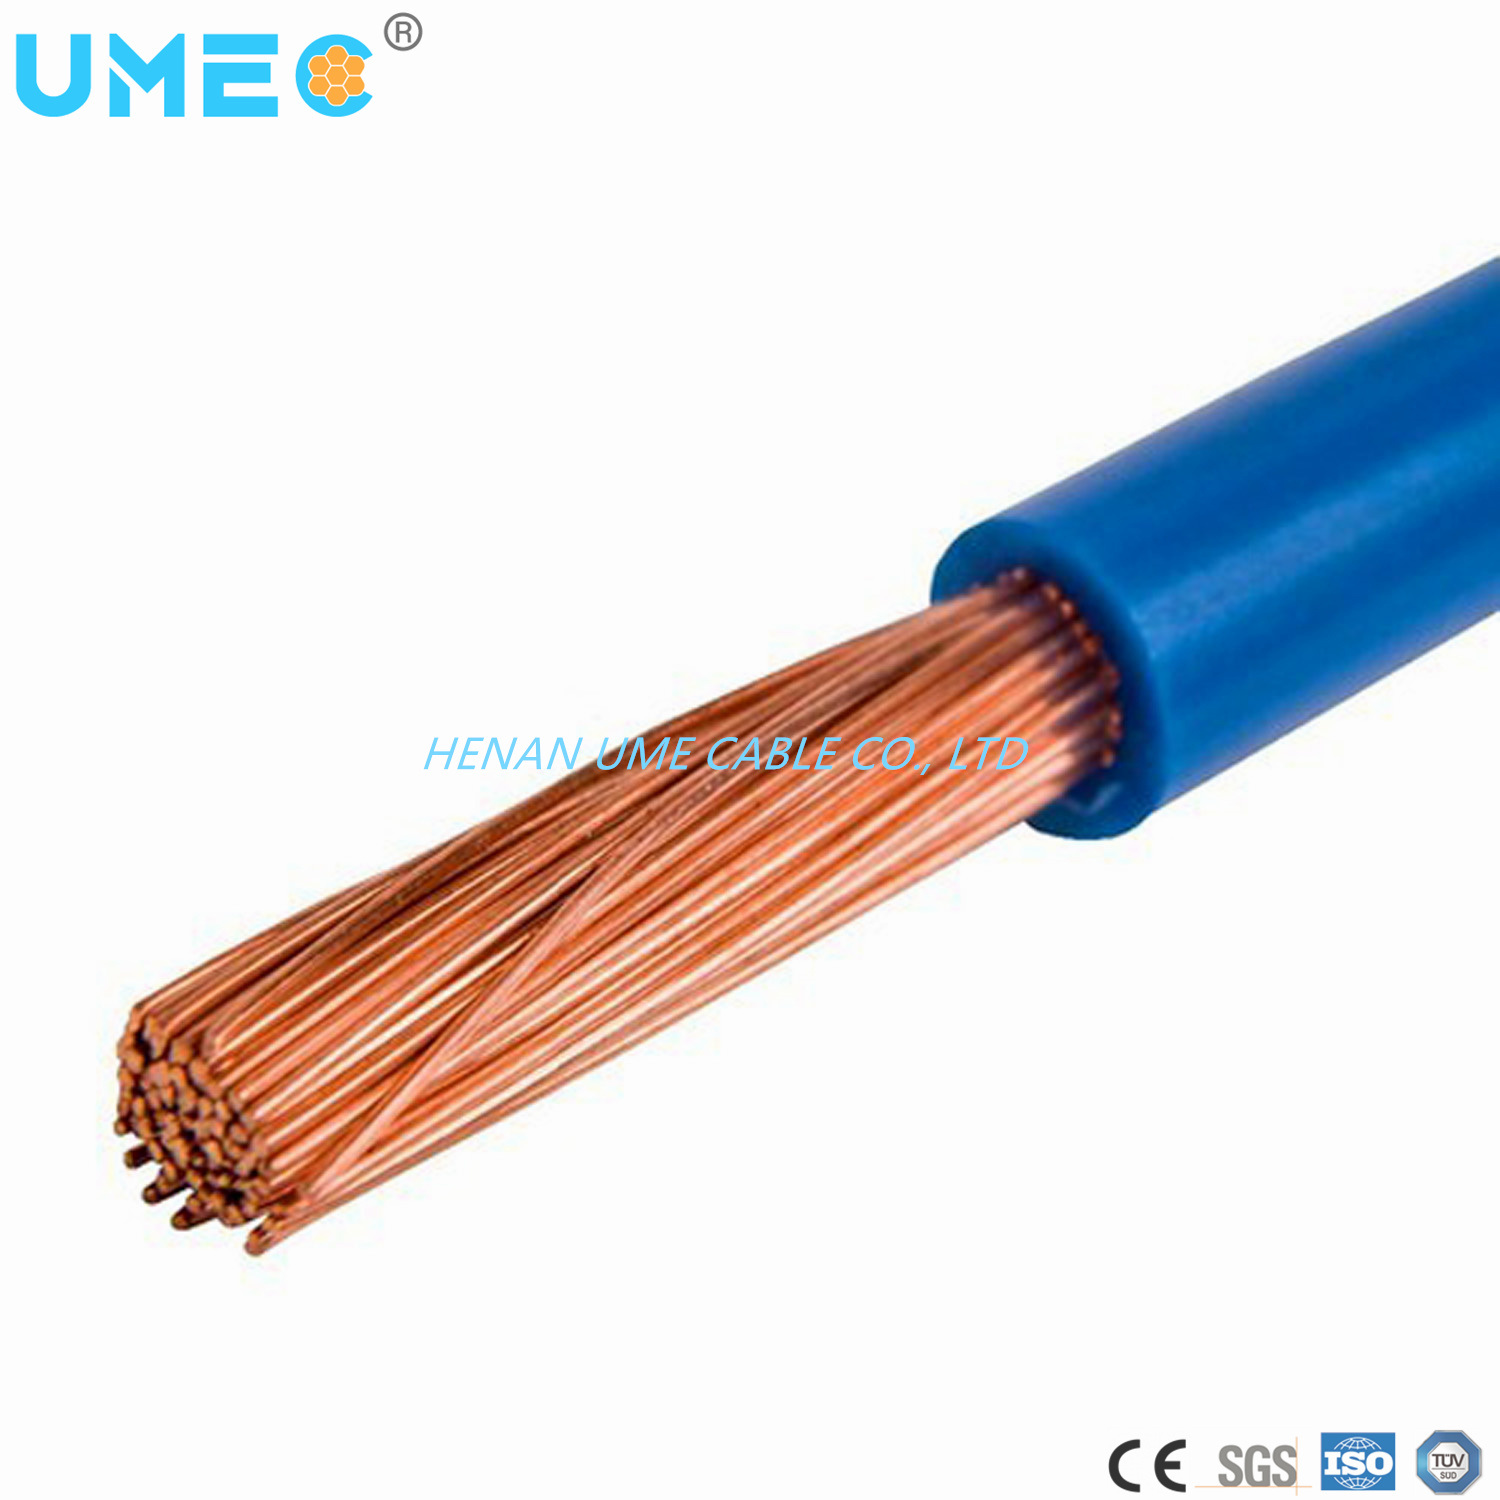 PVC Insulated Multicore Electric Flexible Wire Power Cable 450/750V H07V-K